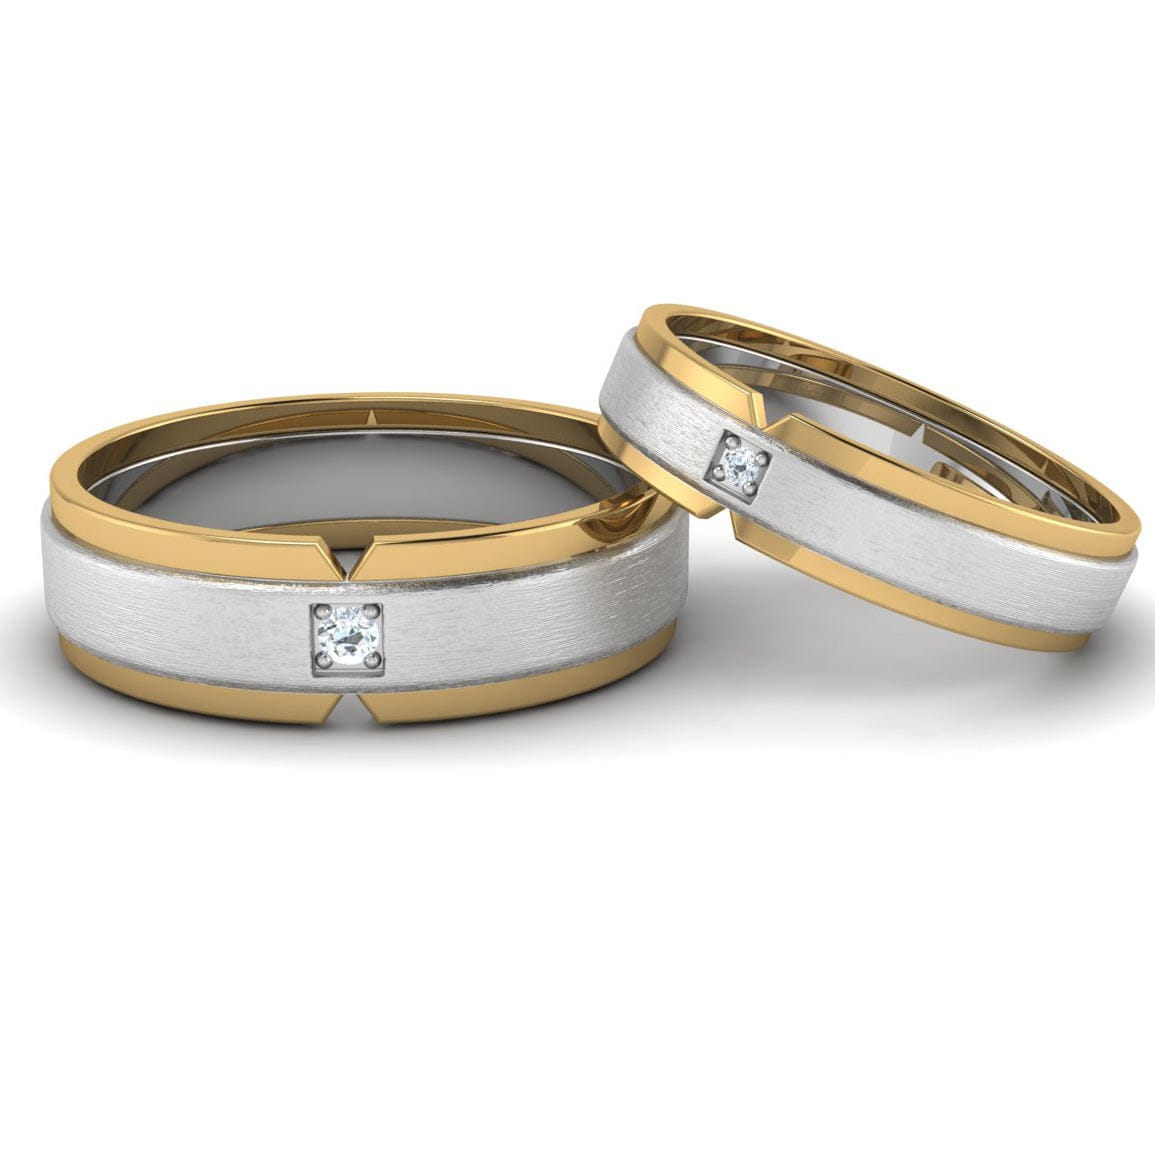 18K Gold 24k Gold Couple Rings Simple And Elegant Wedding Band For Lovers  From Galaxyjewelry, $16.77 | DHgate.Com